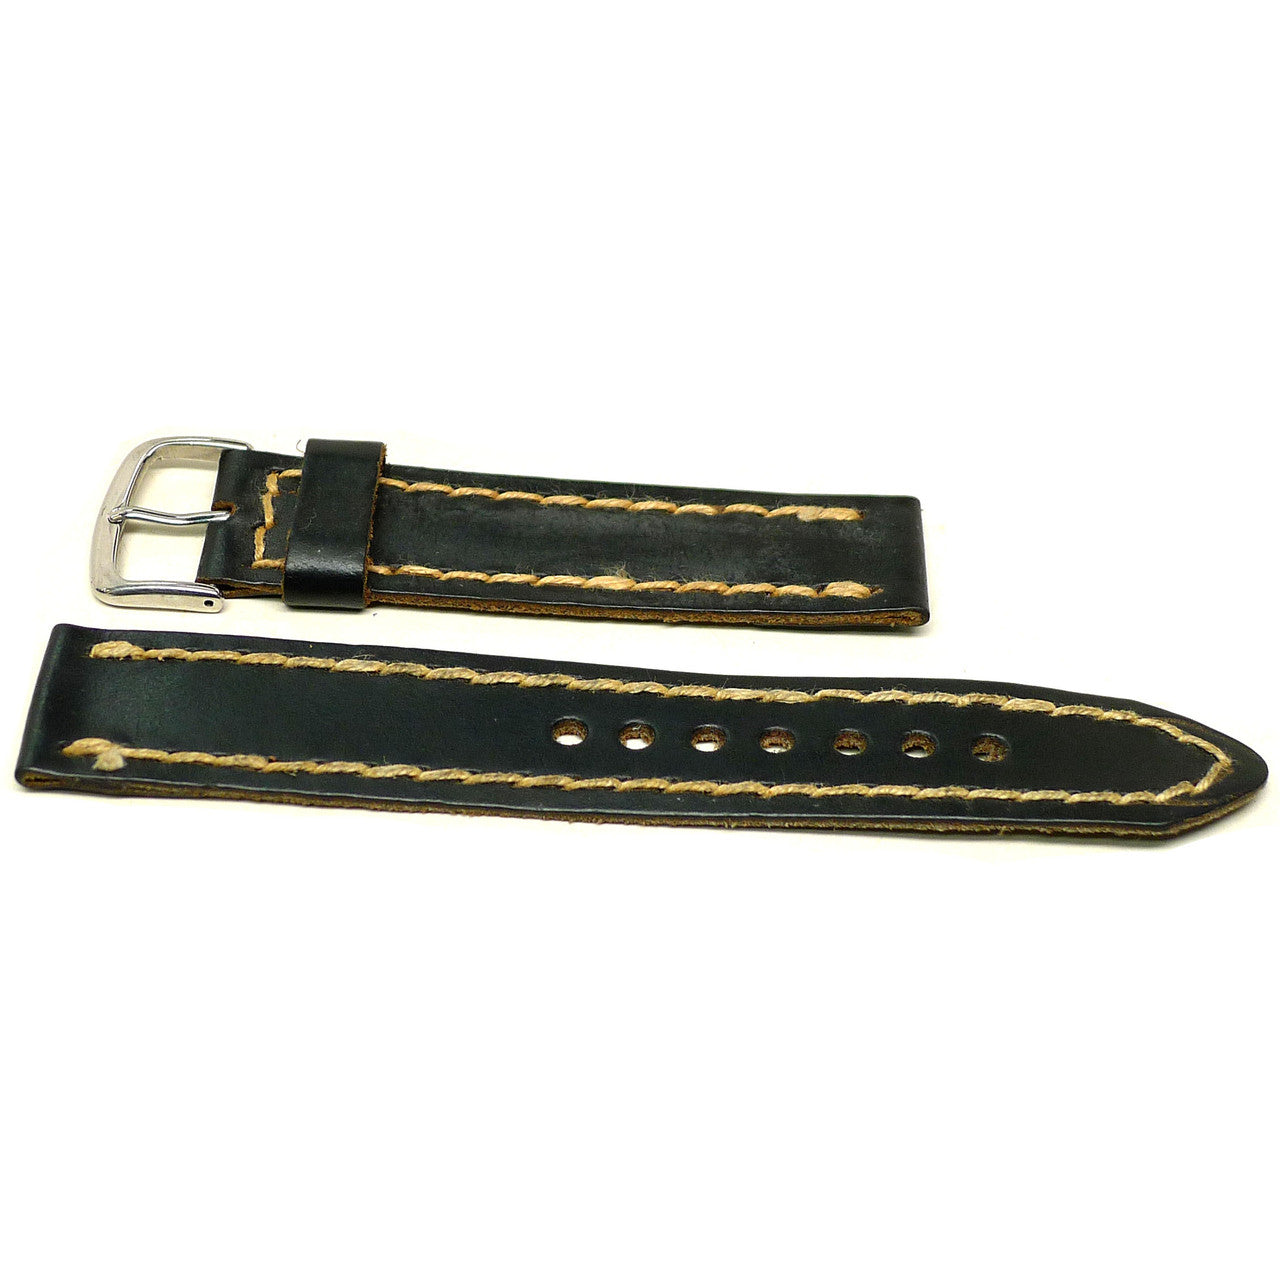 Aged 20mm Leather Watch Strap By DaLuca Straps